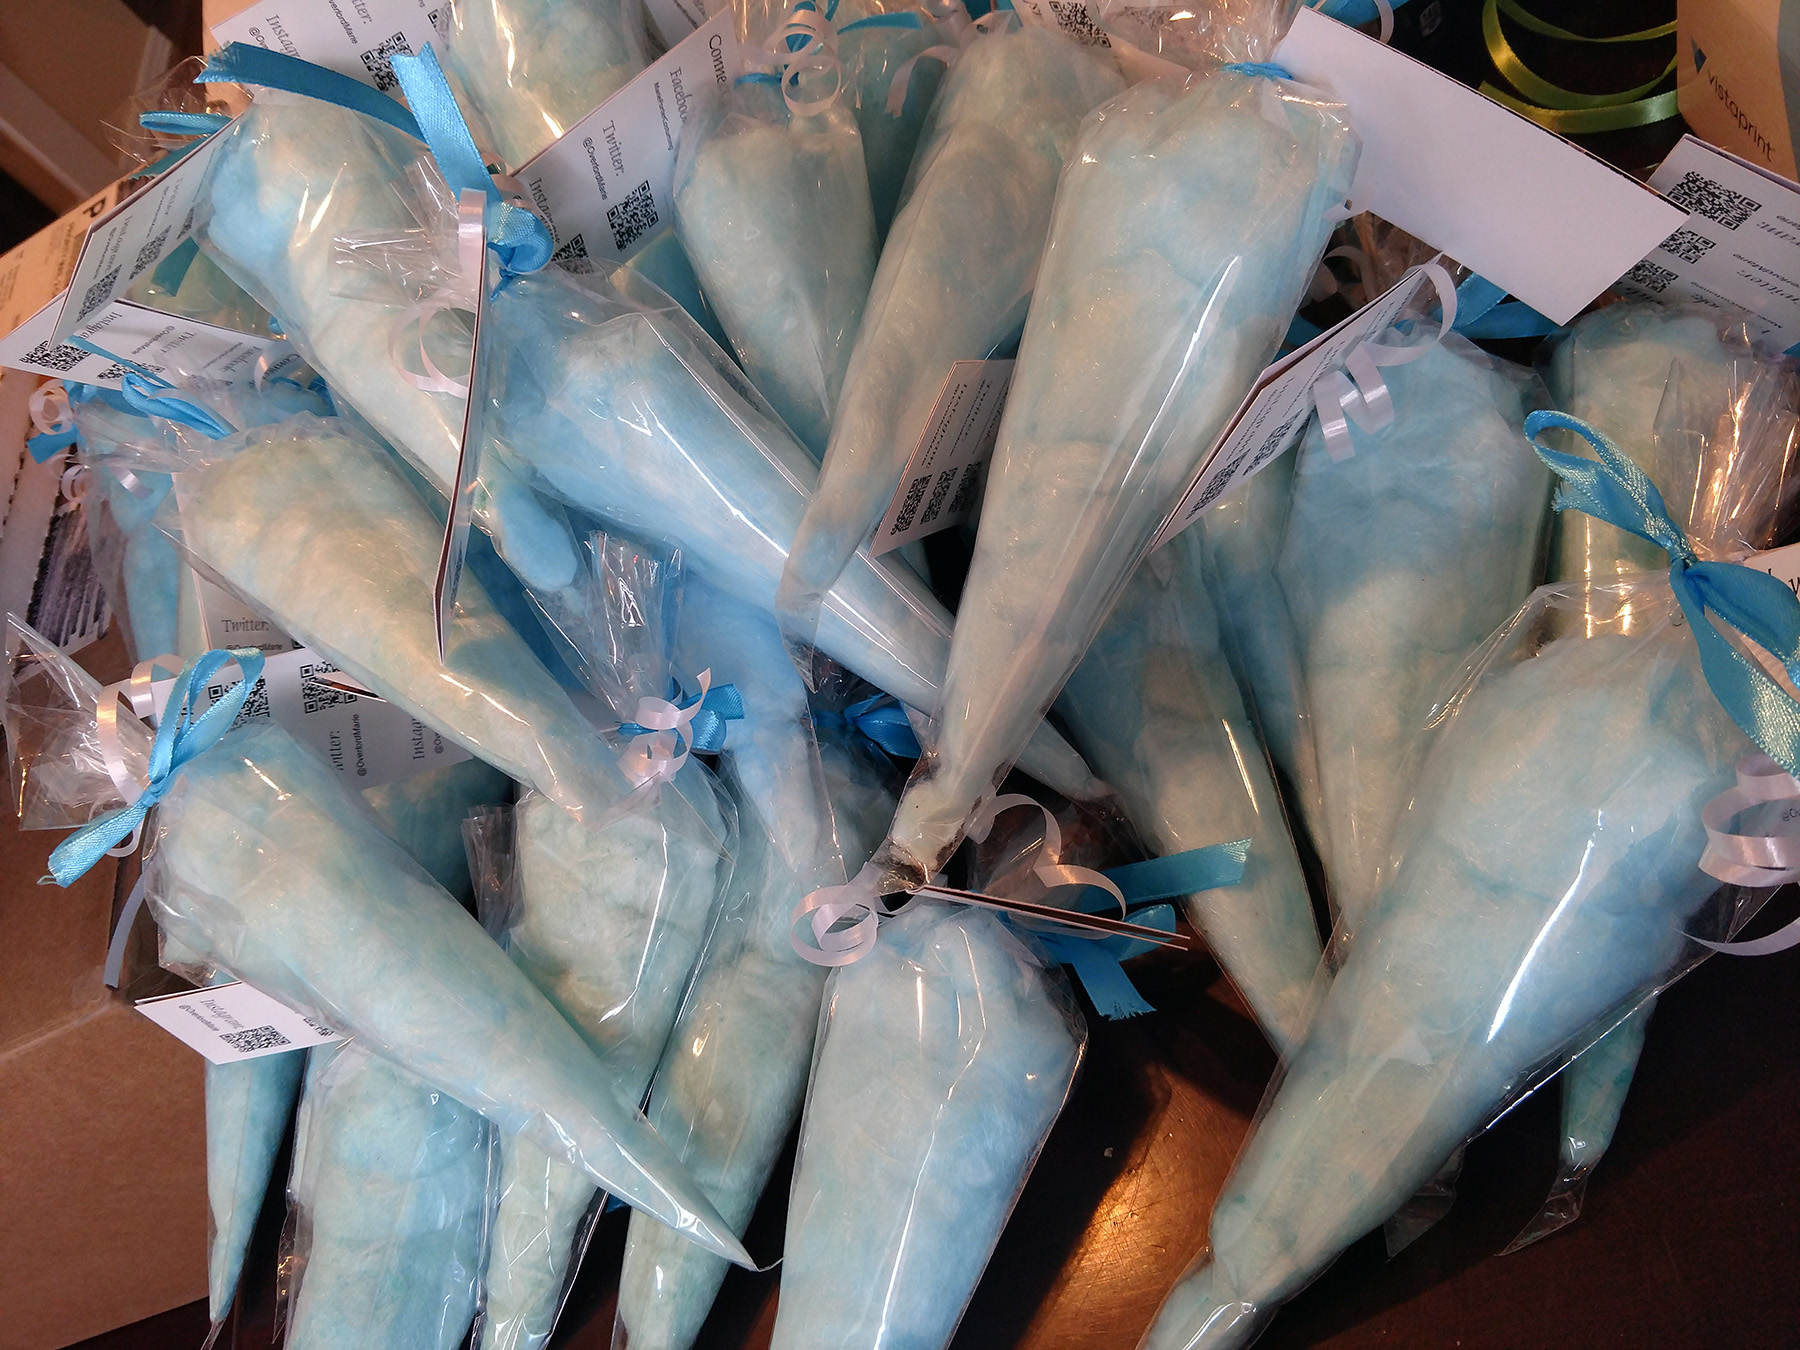 A pile of large clear frosting bags stuffed with blue cotton candy.